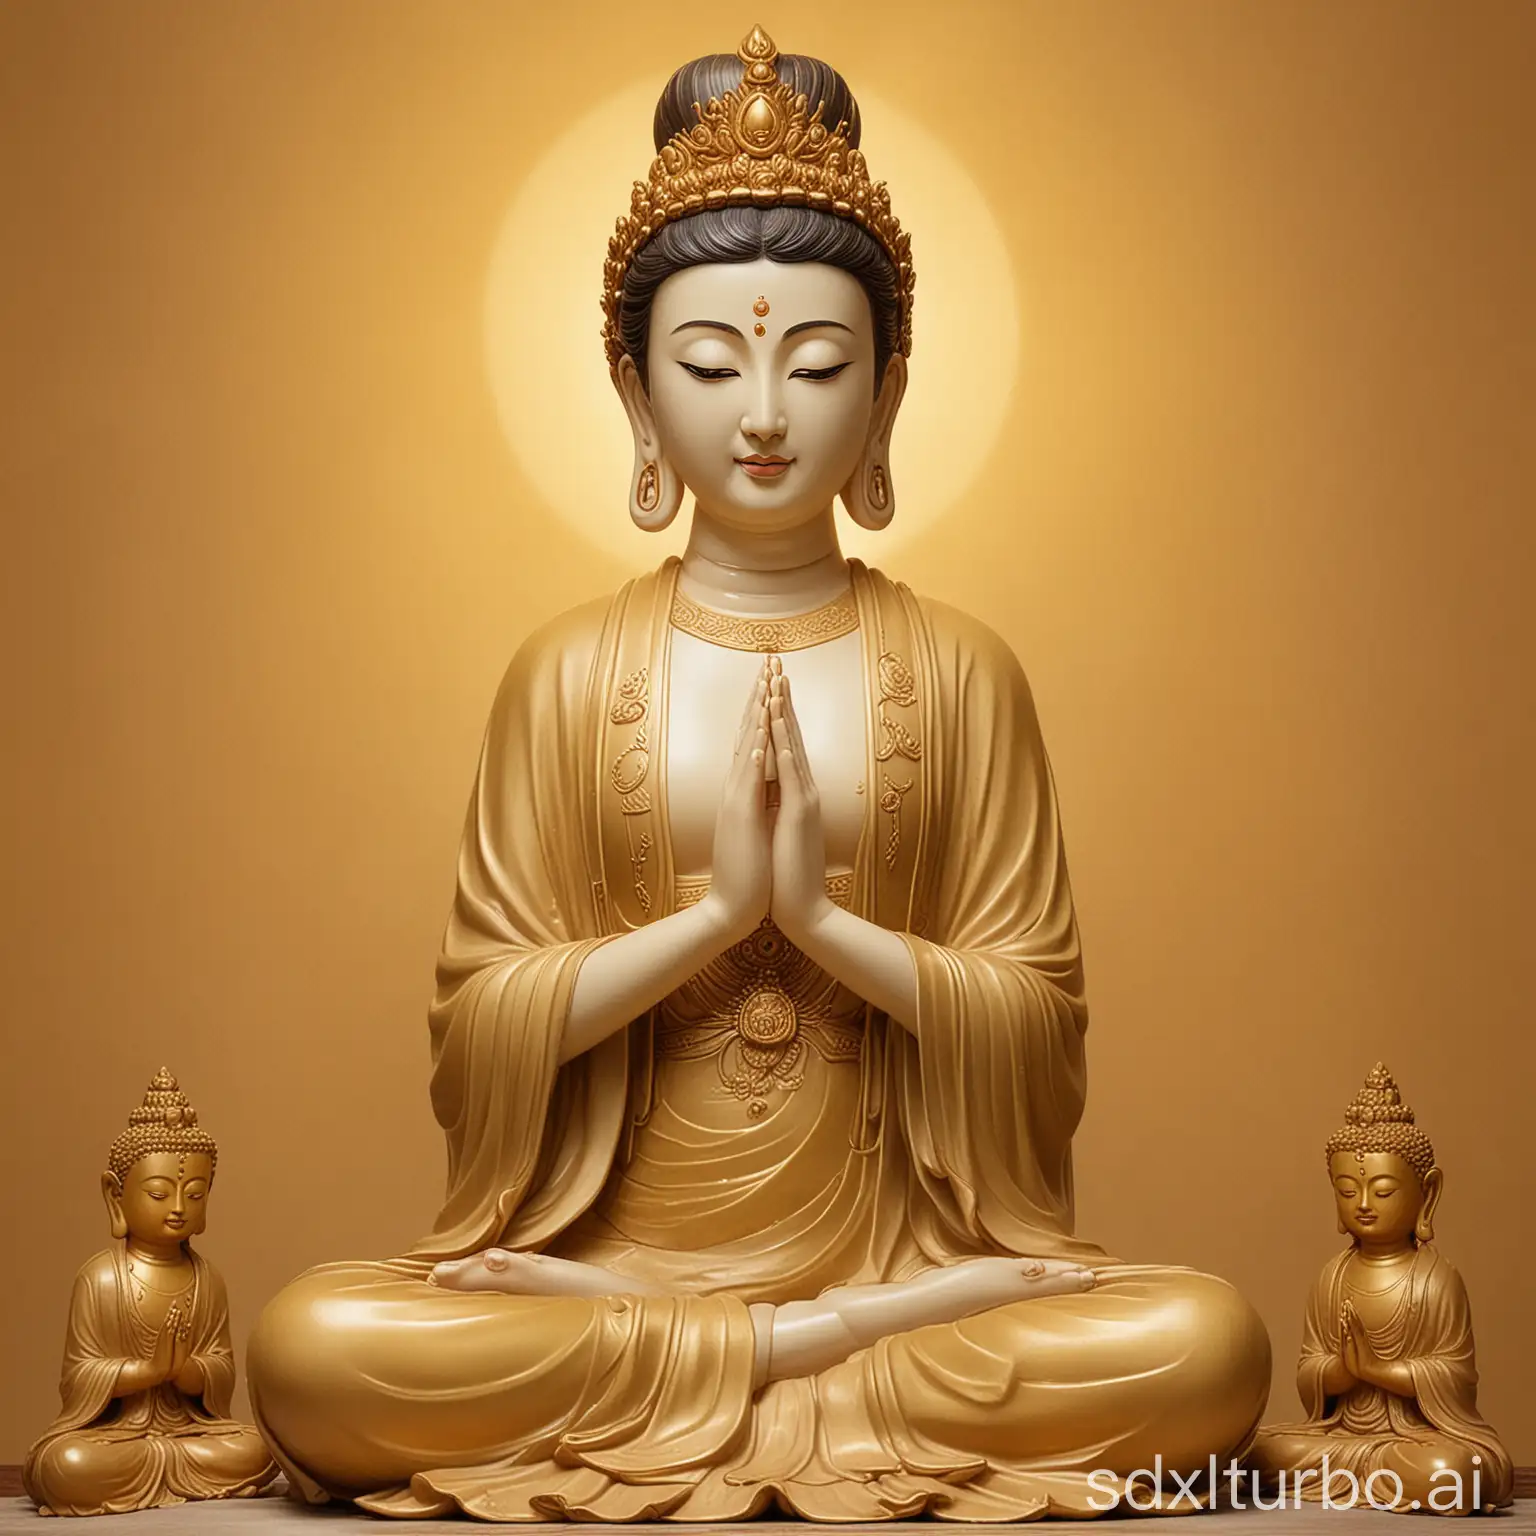 Guanyin Bodhisattva, hands clasped together, sitting cross-legged, with a backdrop of Buddha's radiance, golden background, full-body image, various gentle eyes, delicate features, beautiful face, upper body